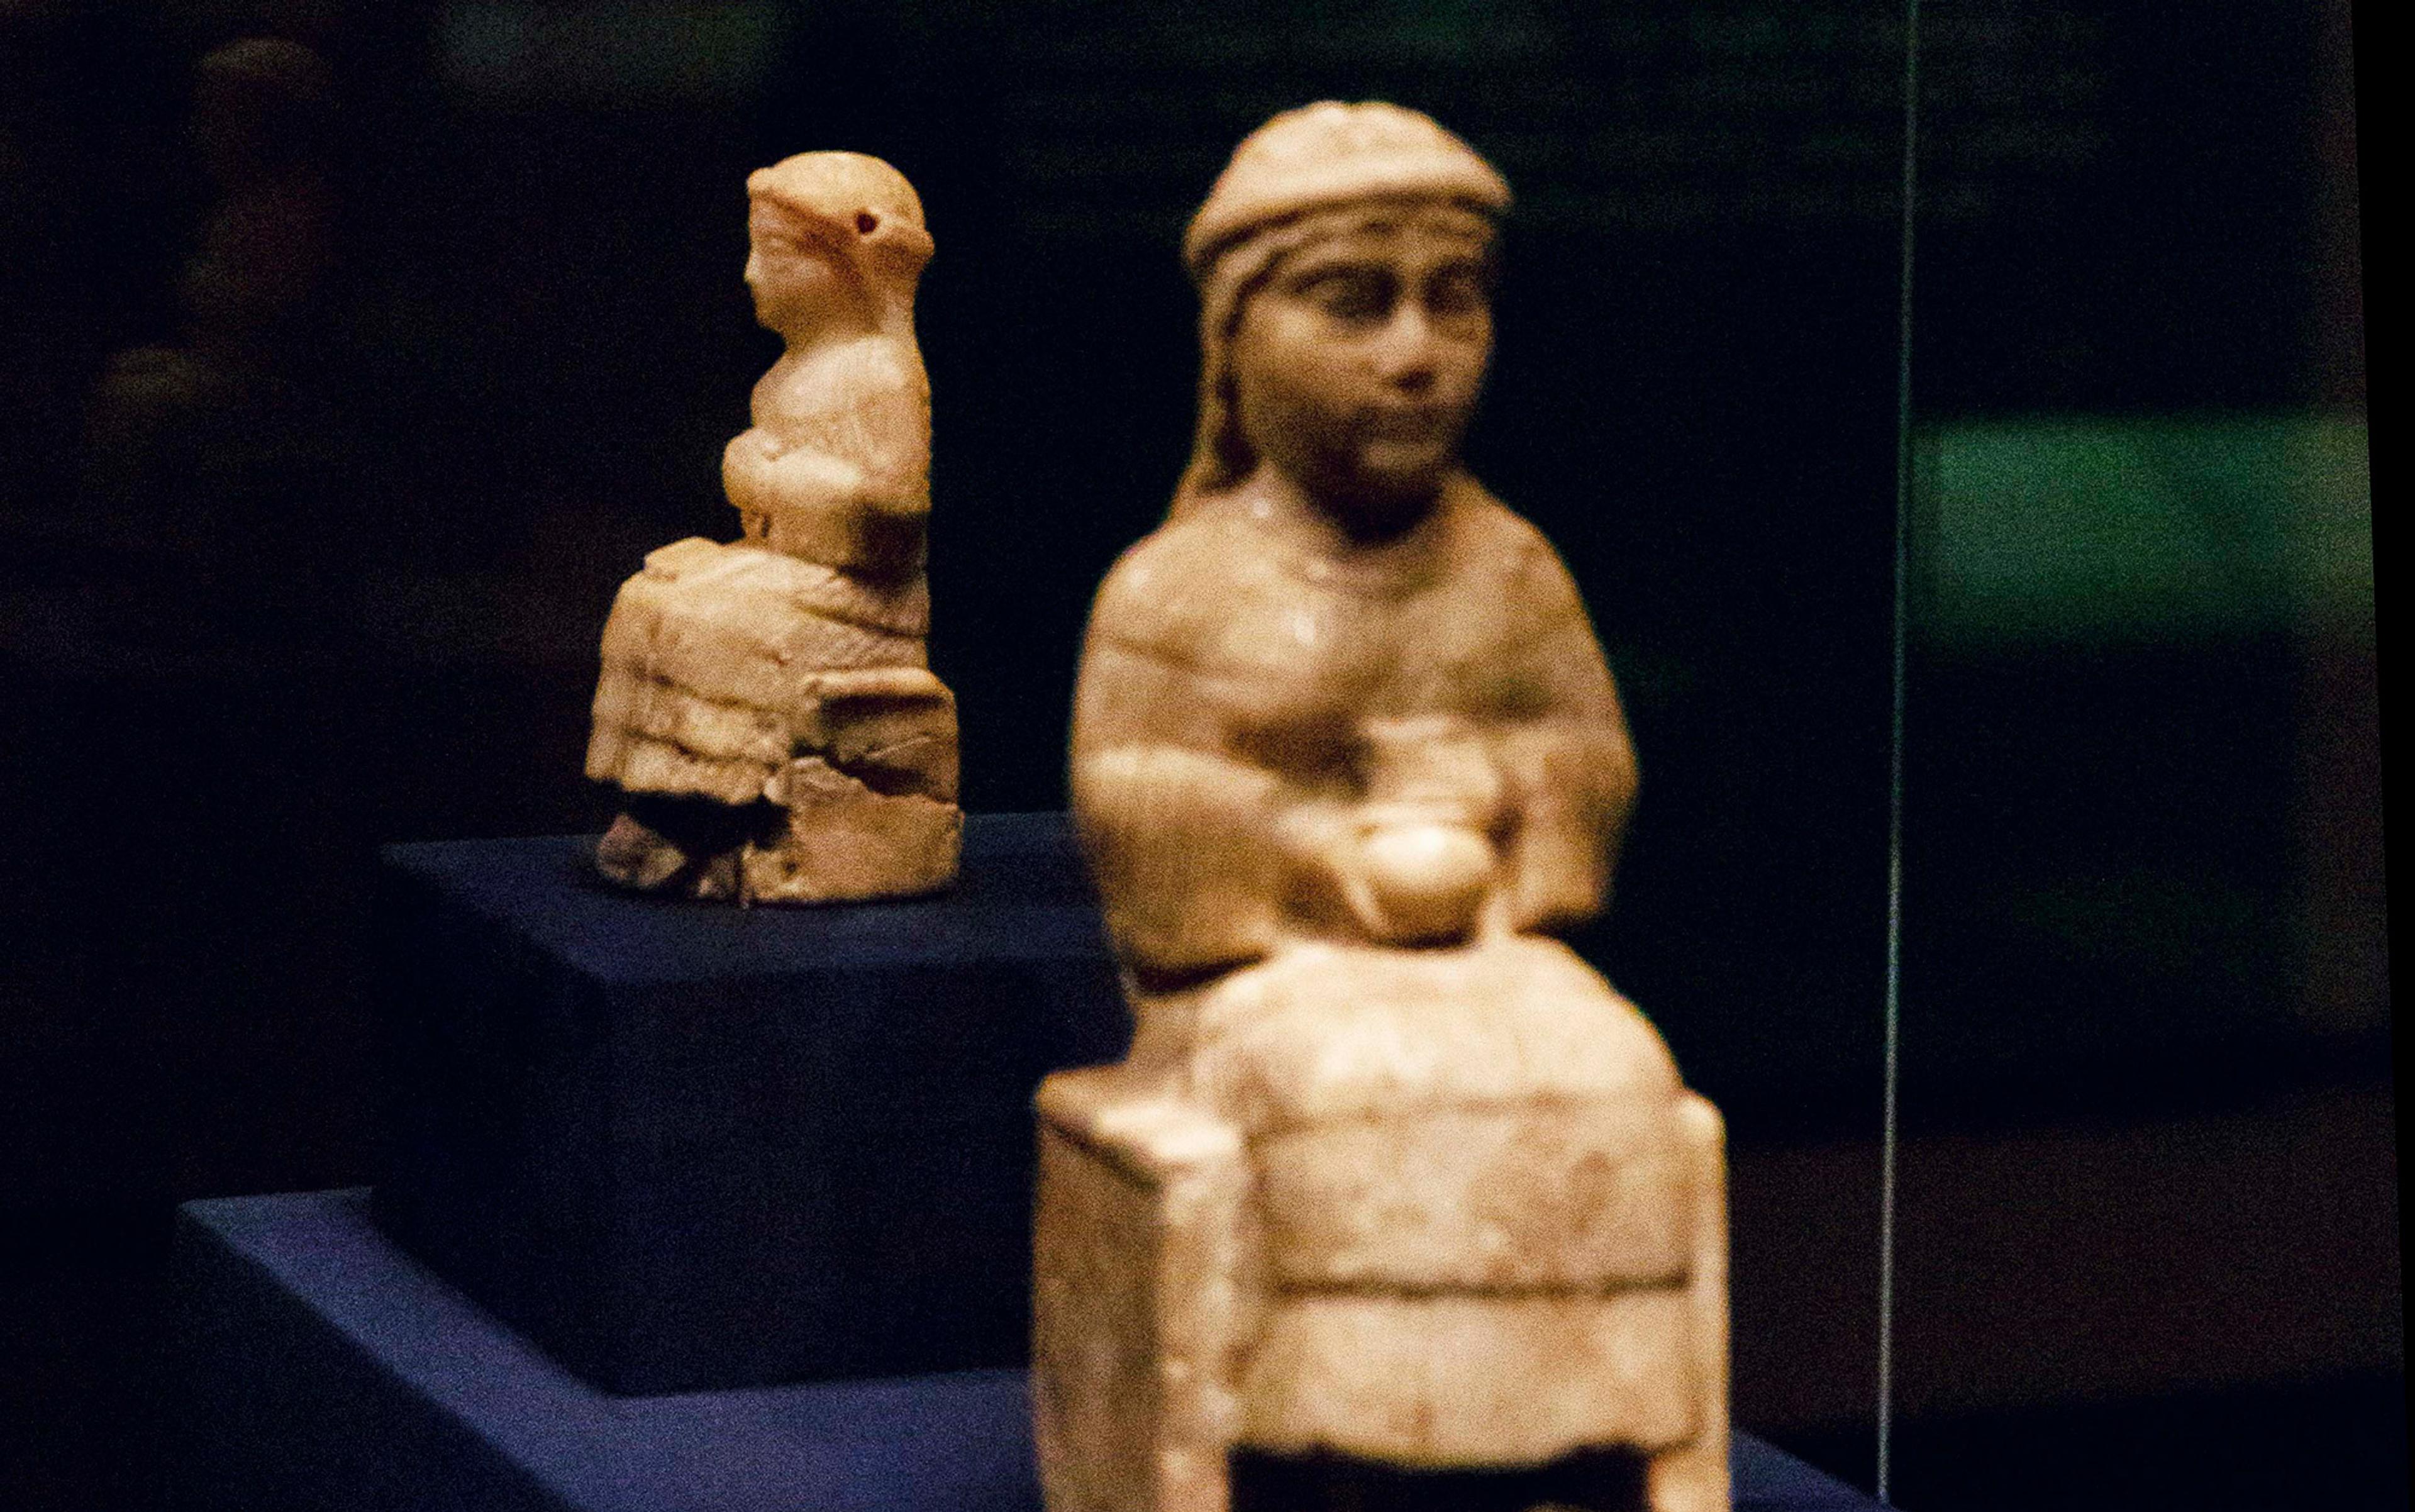 Two small ancient stone statues, each depicting a seated figure, displayed on dark stands in a dimly lit setting.